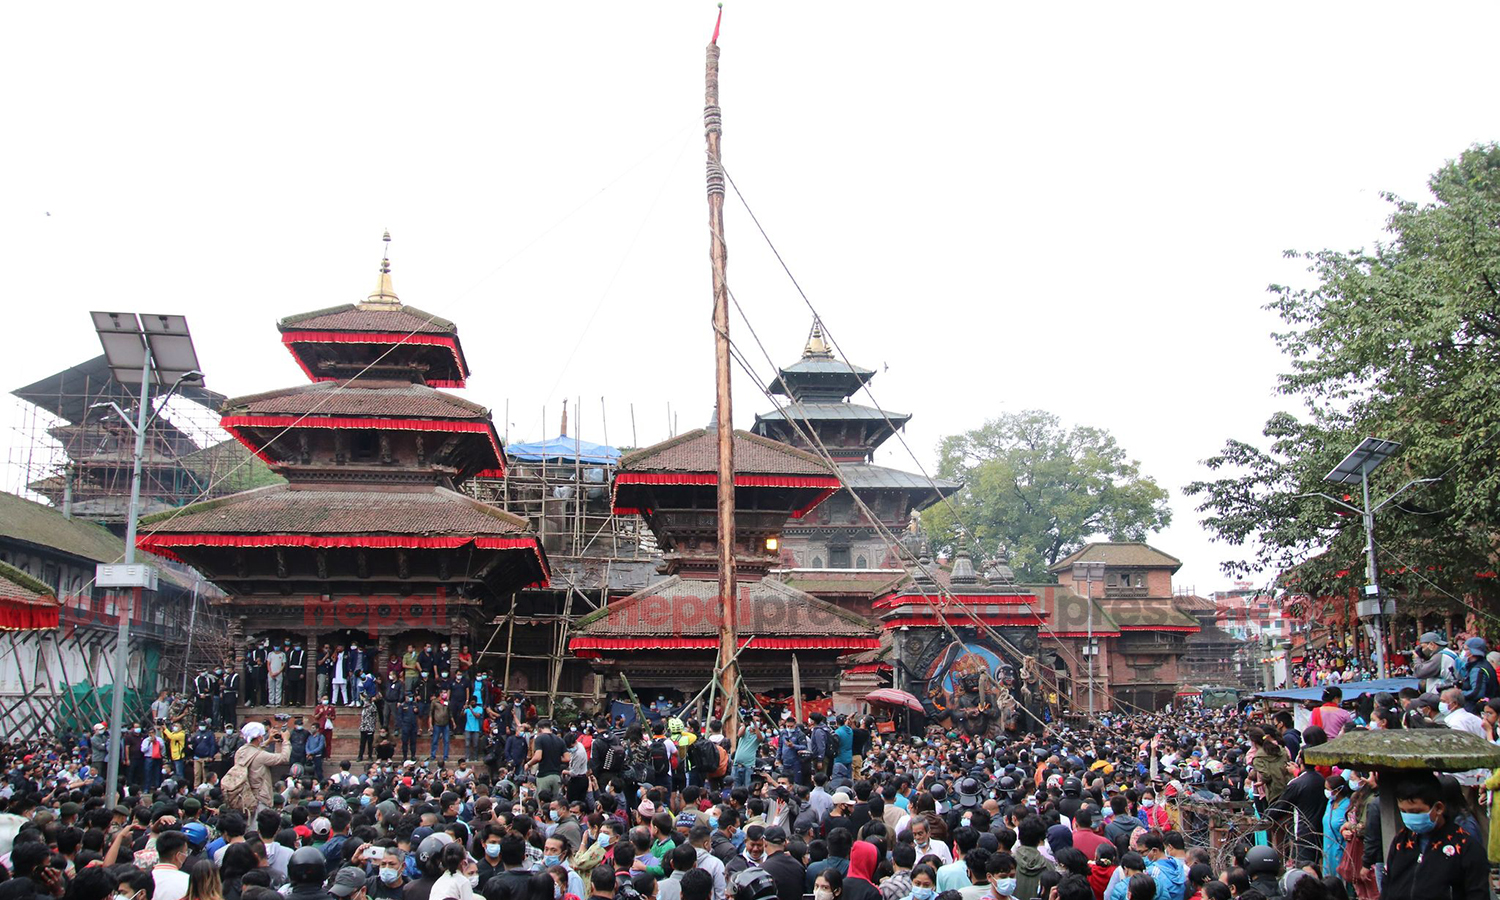 Indra Jatra festival formally begins today with erection of lingo (With photos)